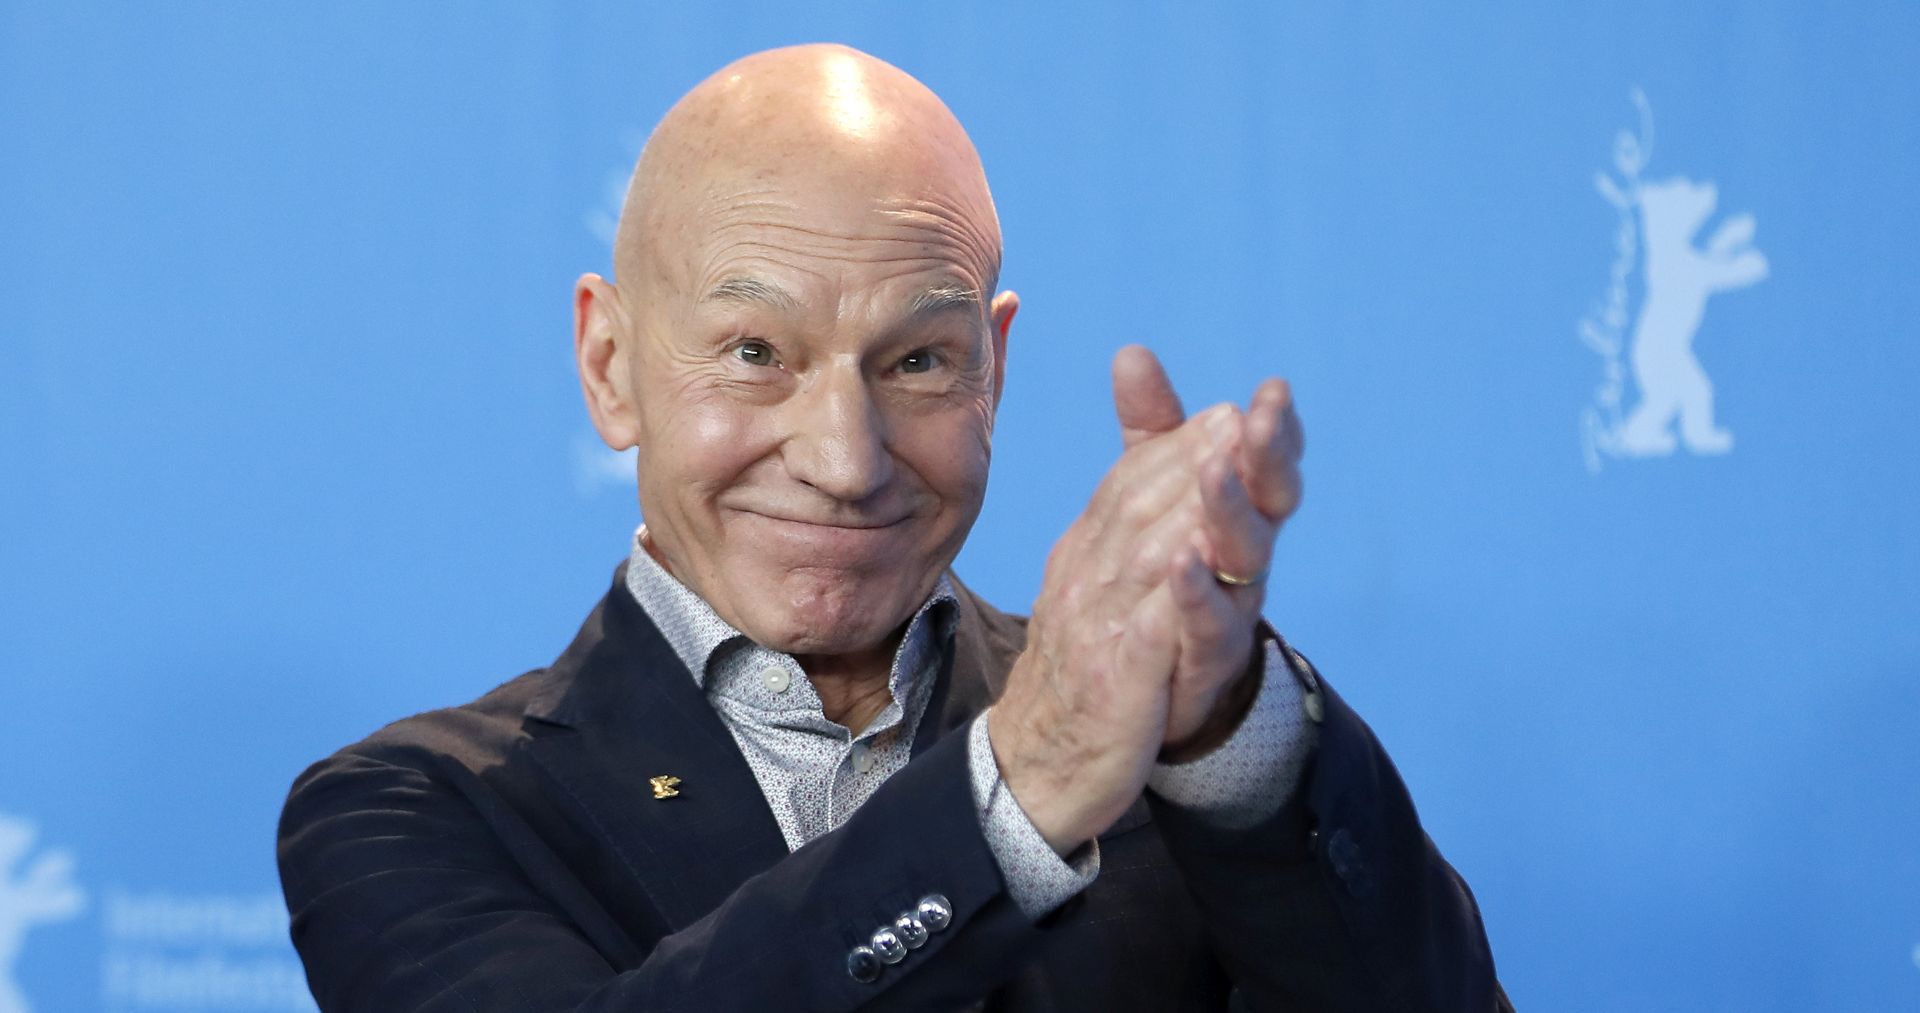 epa05800171 British actor Patrick Stewart poses during the photocall of 'Logan' during the 67th annual Berlin Film Festival, in Berlin, Germany, 17 February 2017. The movie is presented in the Official Competition at the Berlinale that runs from 09 to 19 February.  EPA/IAN LANGSDON